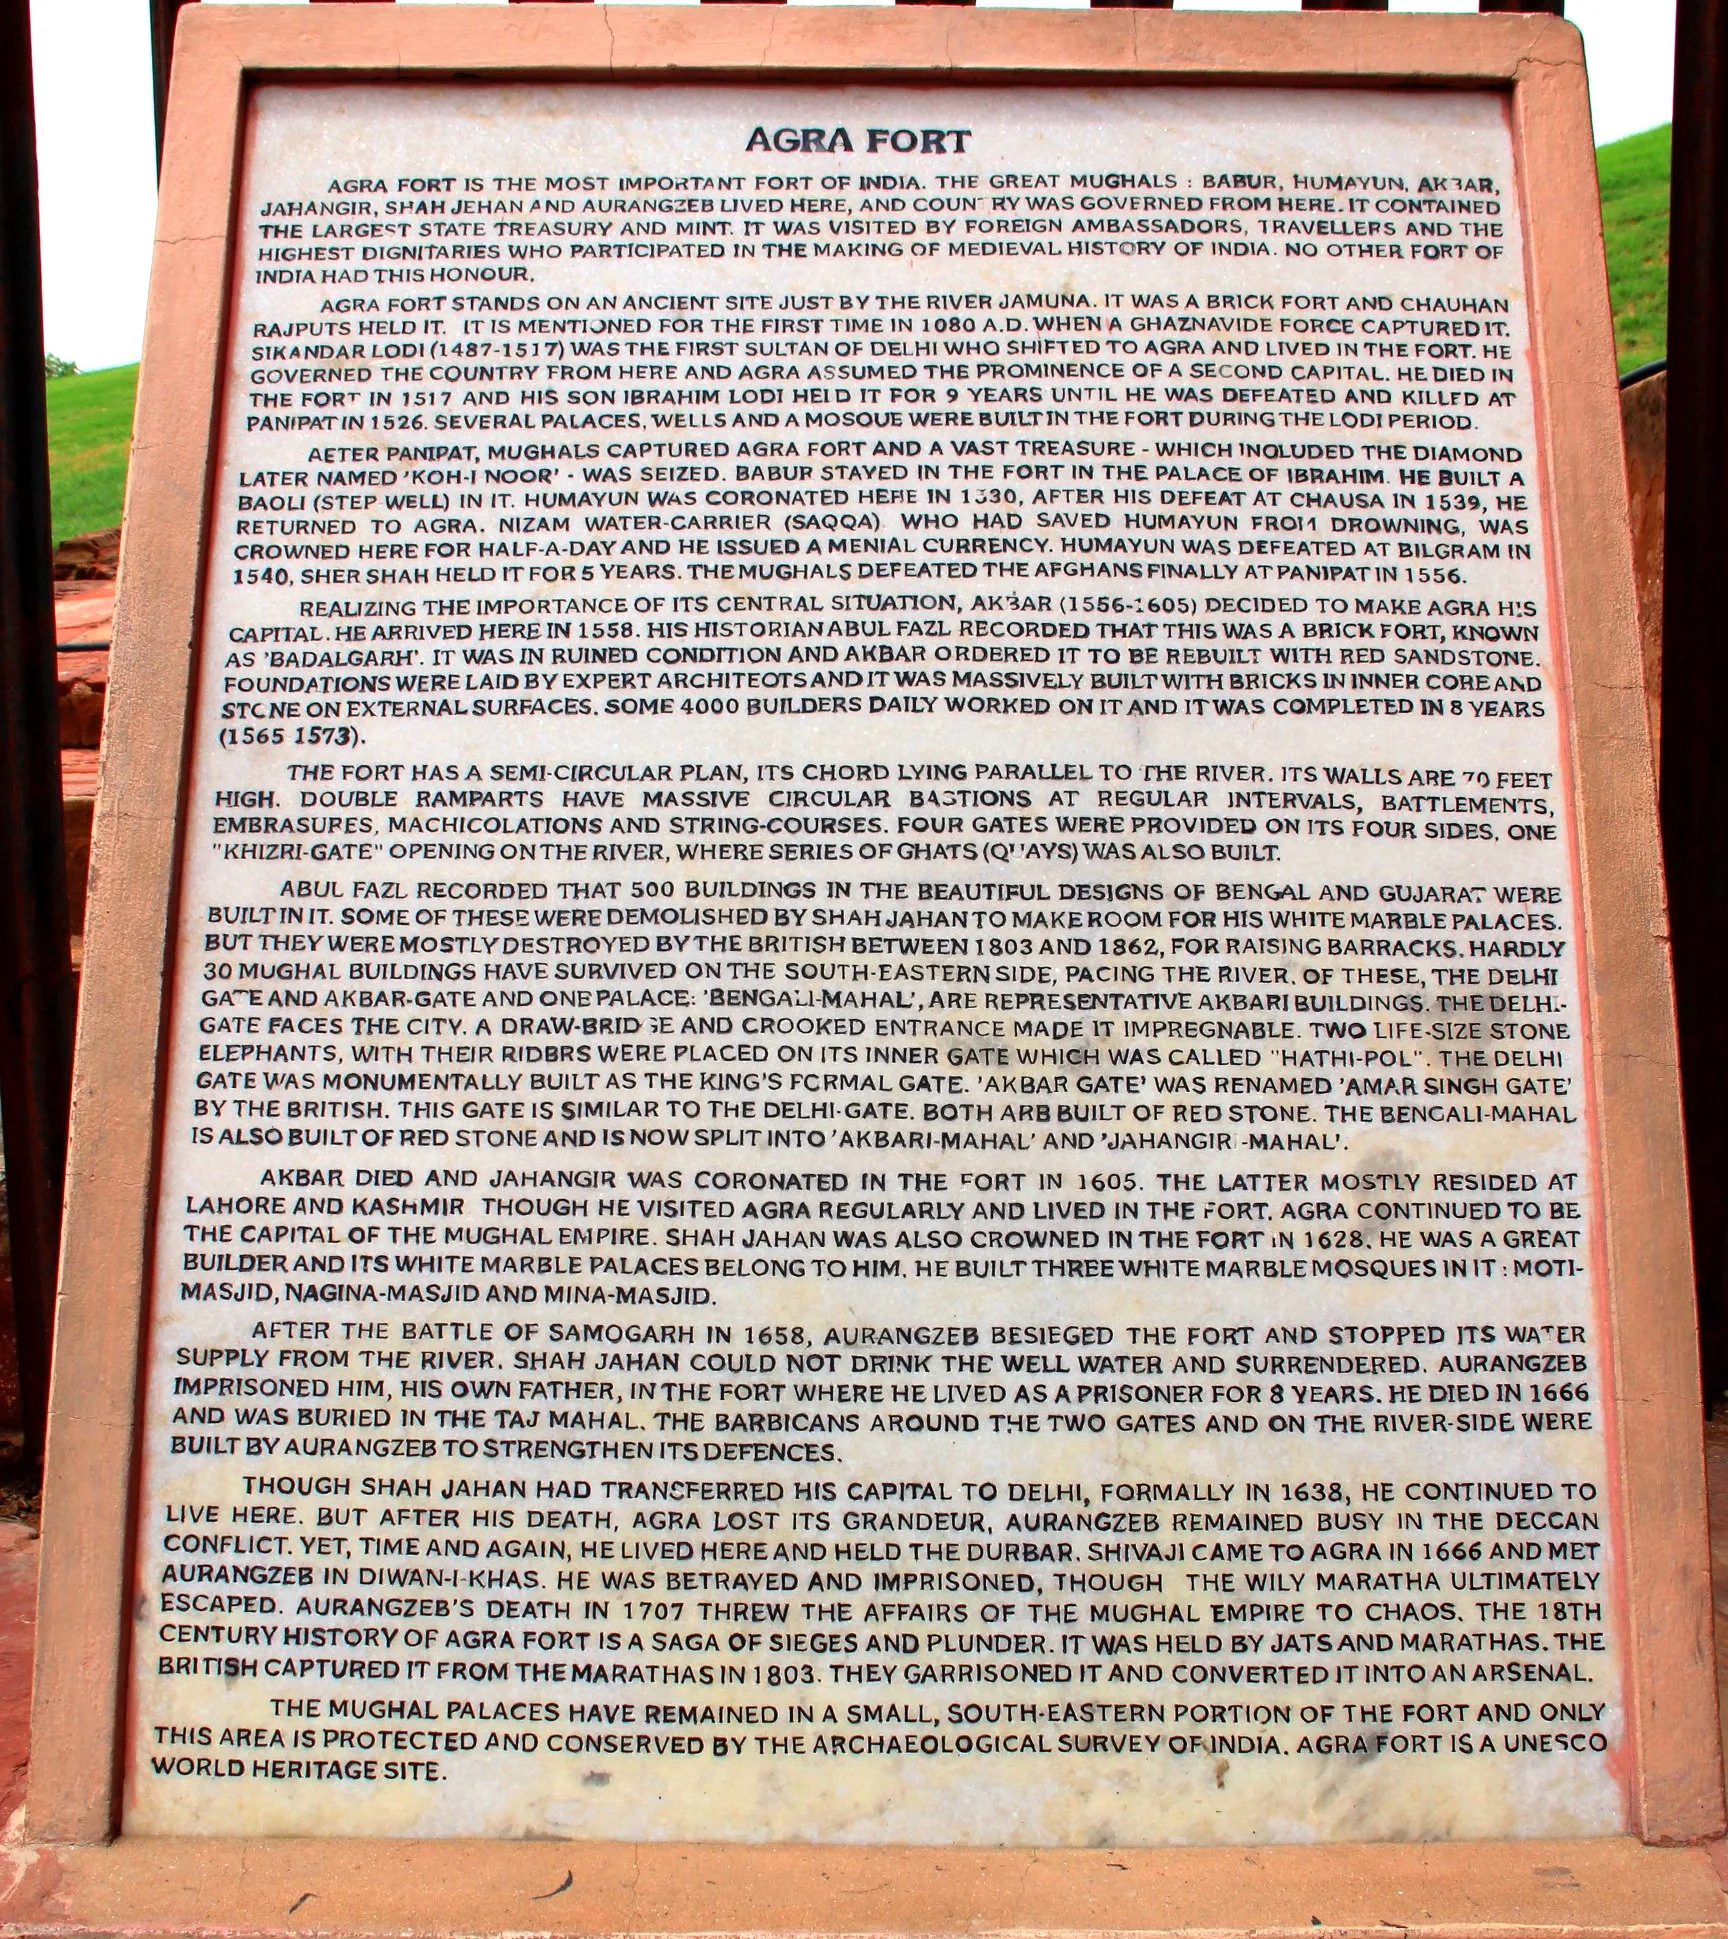 History of Agra Fort, Agra, India